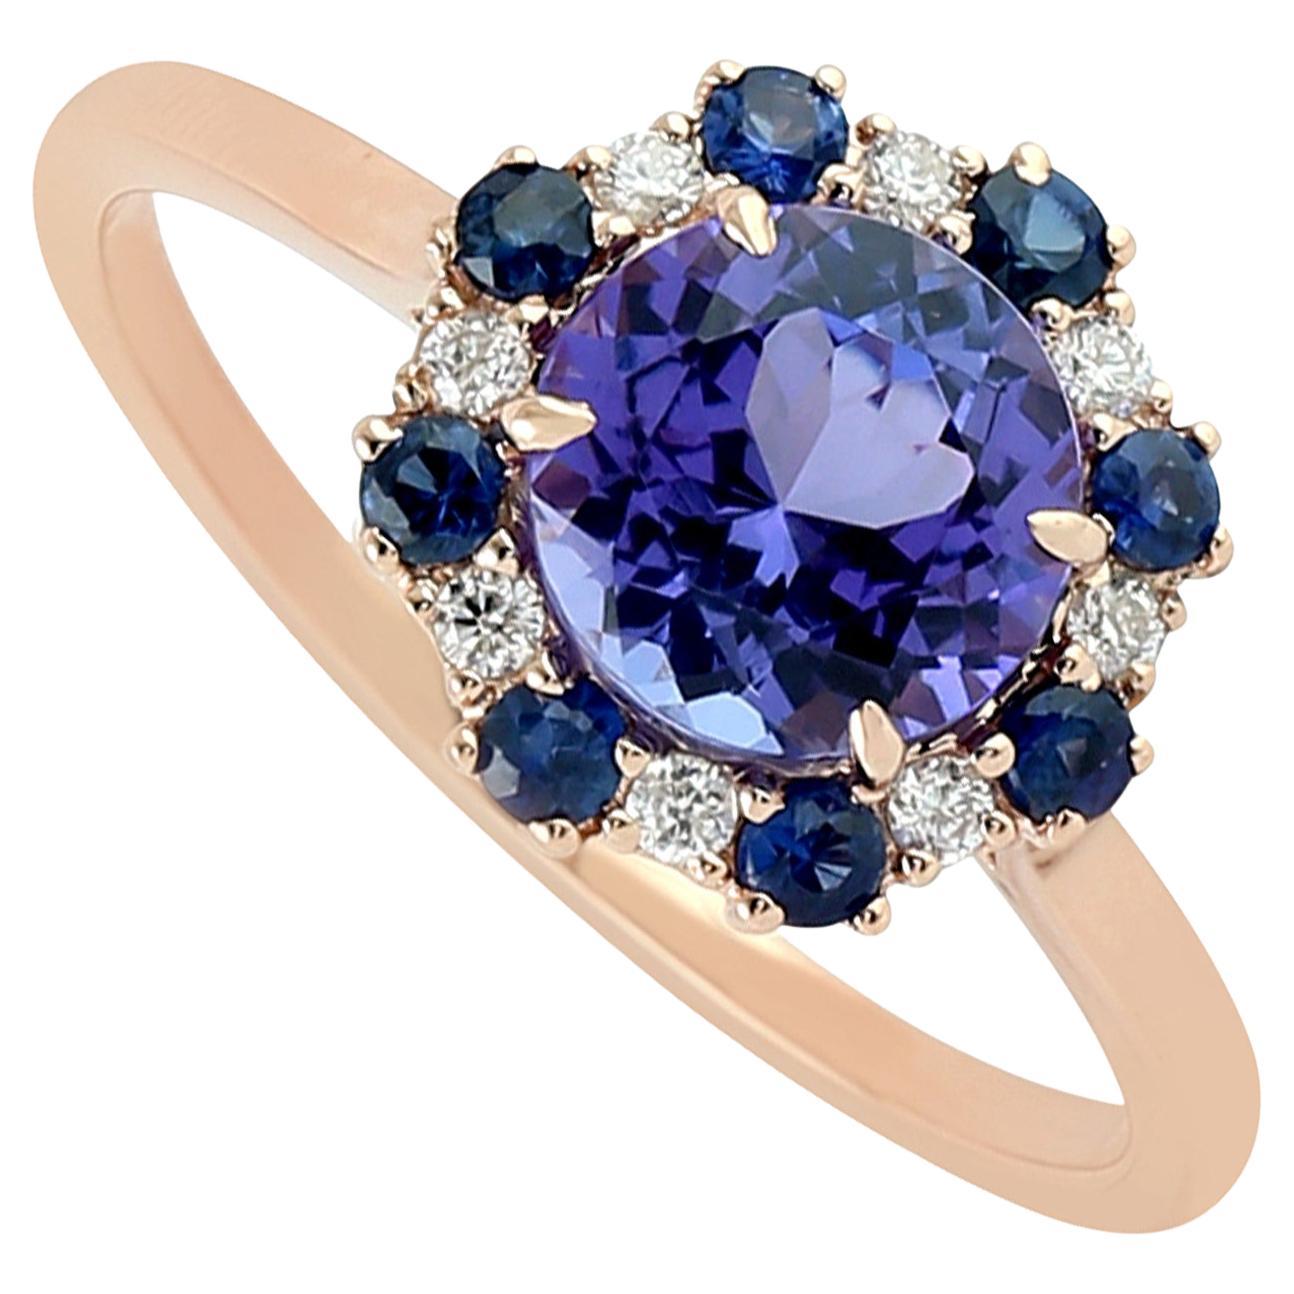 Tanzanite Cocktail Ring With Blue Sapphire & Diamonds Made In 18k Rose Gold